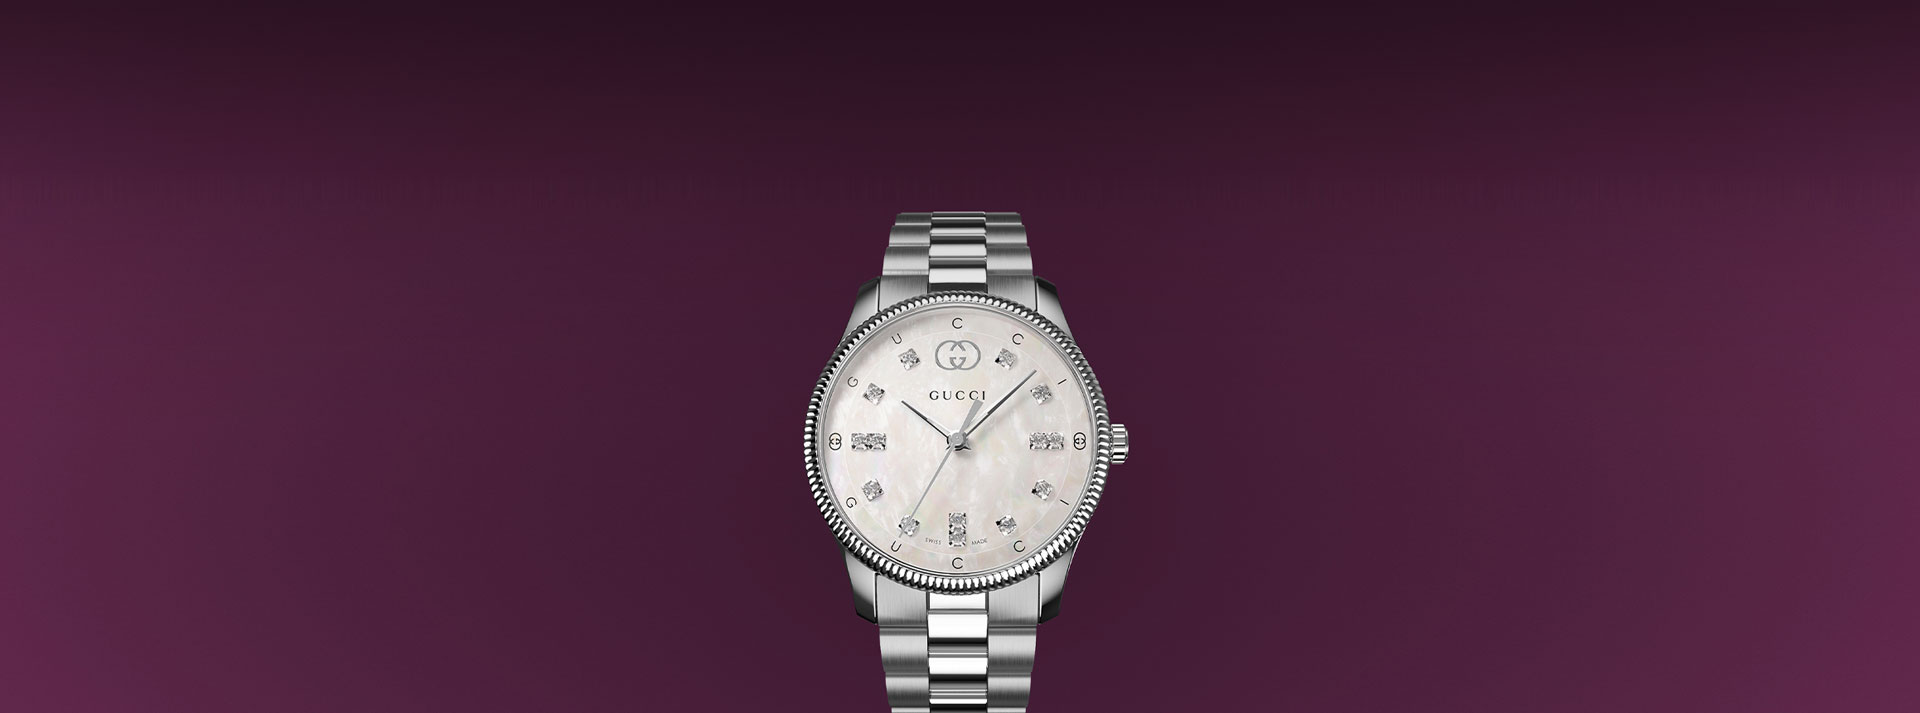 Gucci Watches Banner